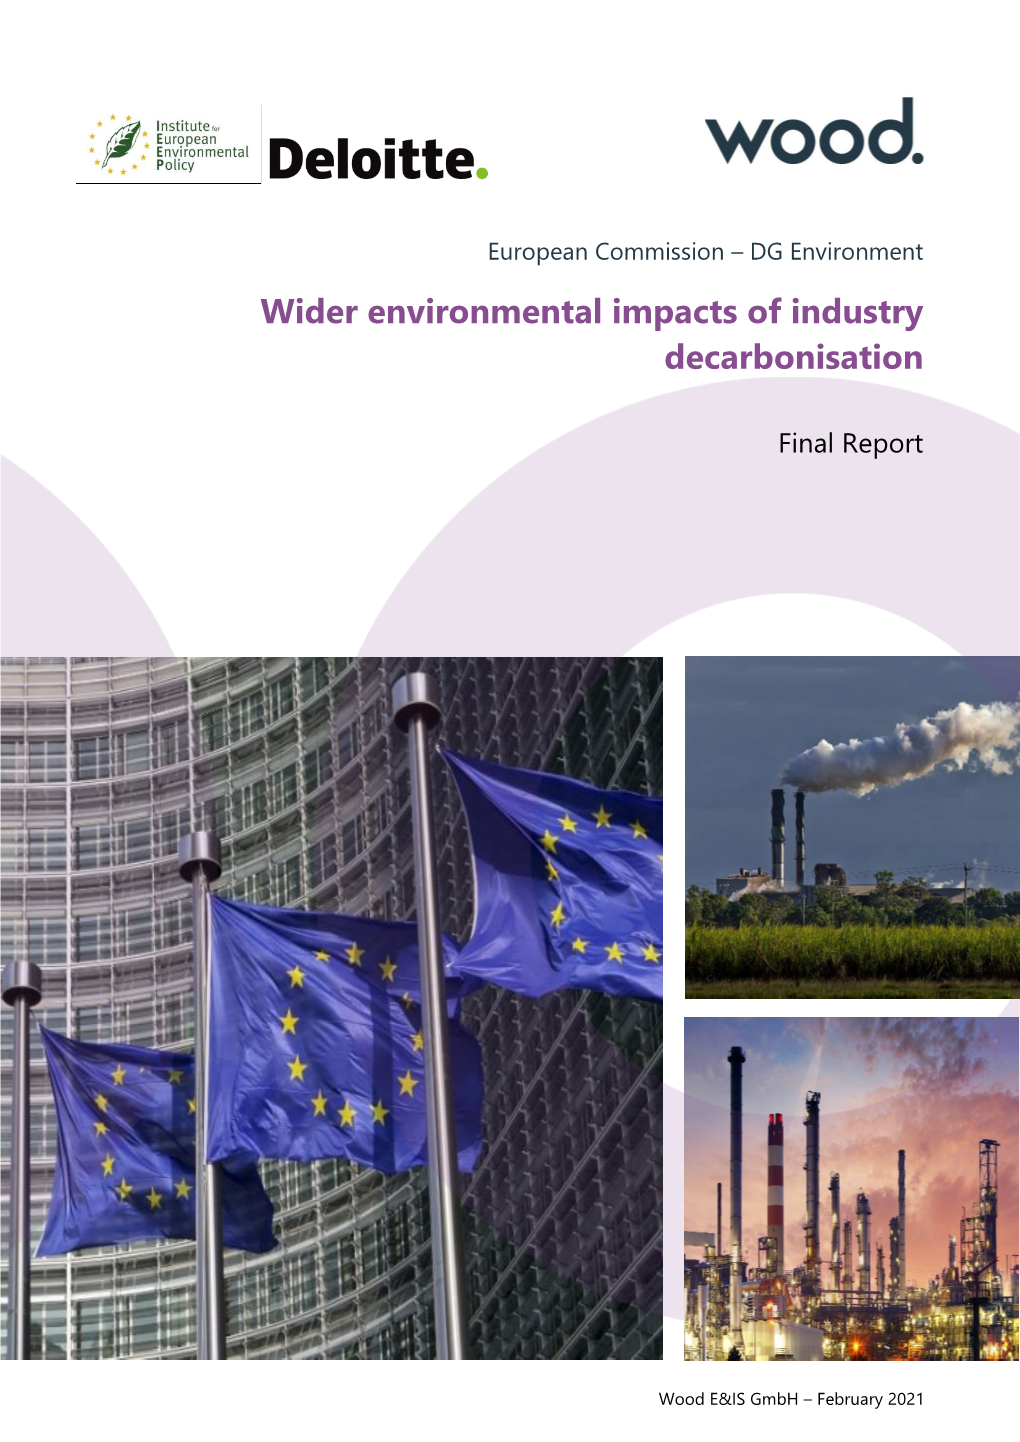 Wider Environmental Impacts of Industry Decarbonisation